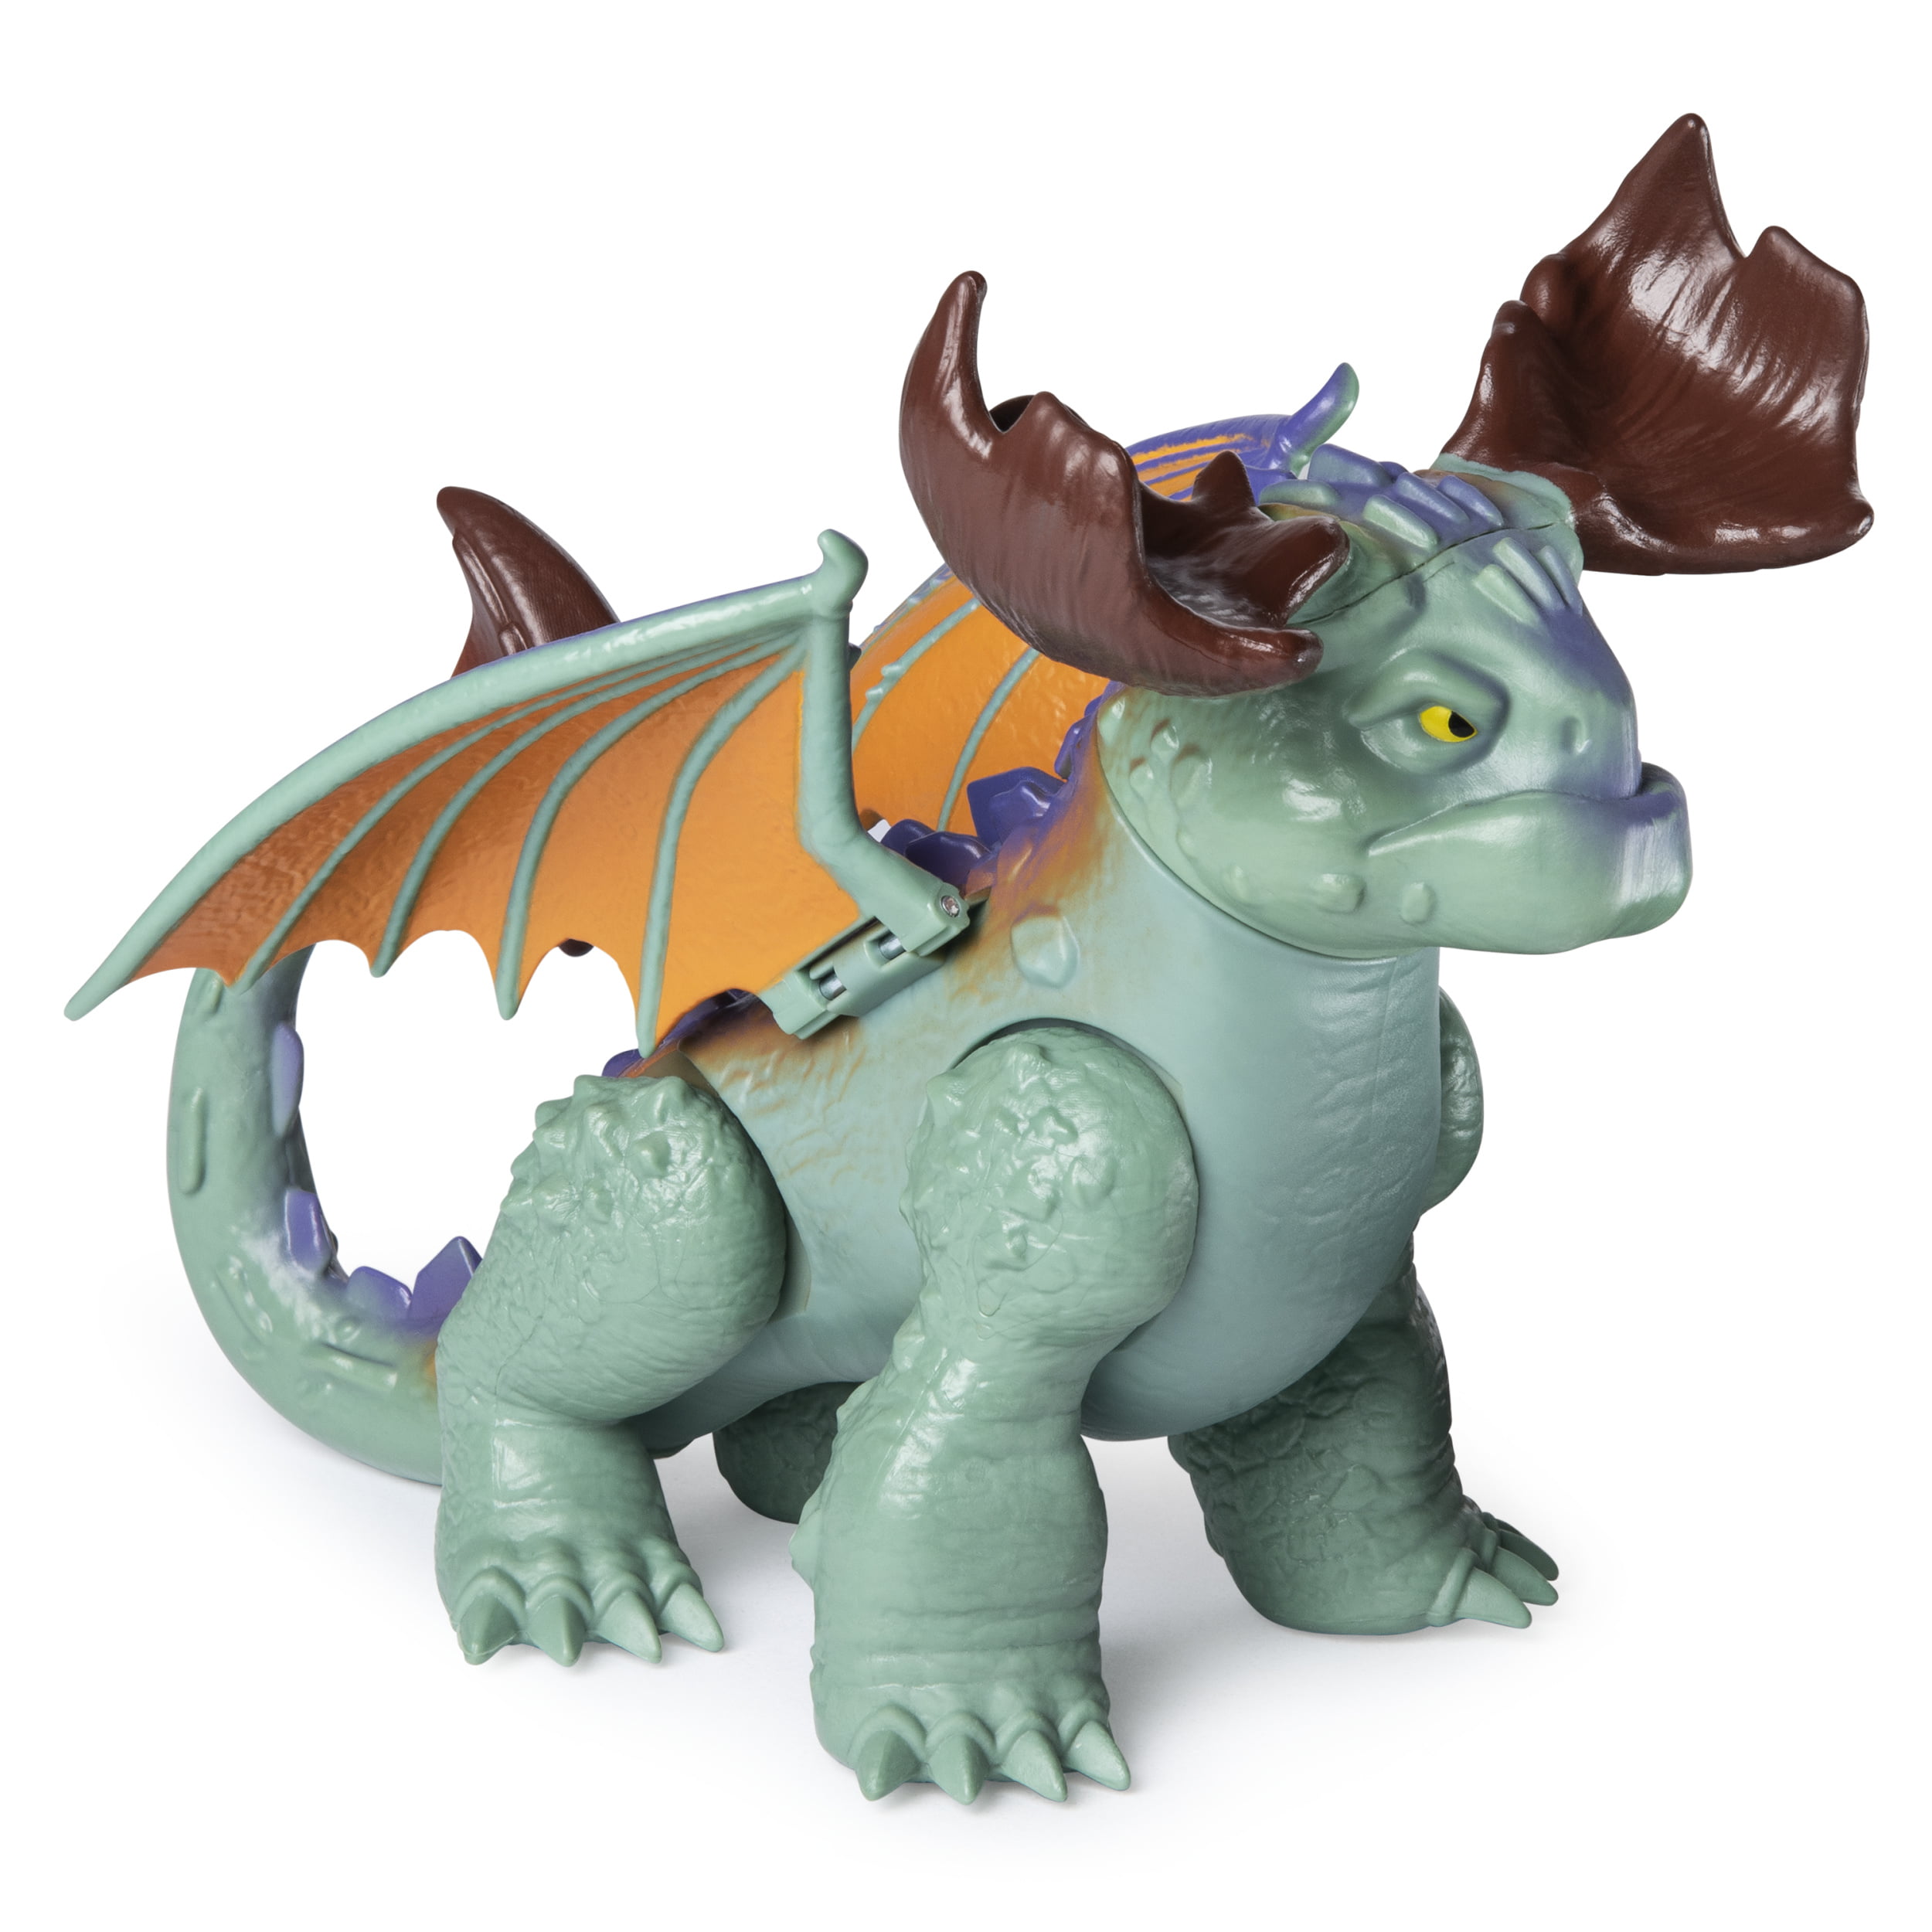 How to Train Your Dragon 3 The Hidden World Crimson Goregutter Action Figure Toy for sale online 